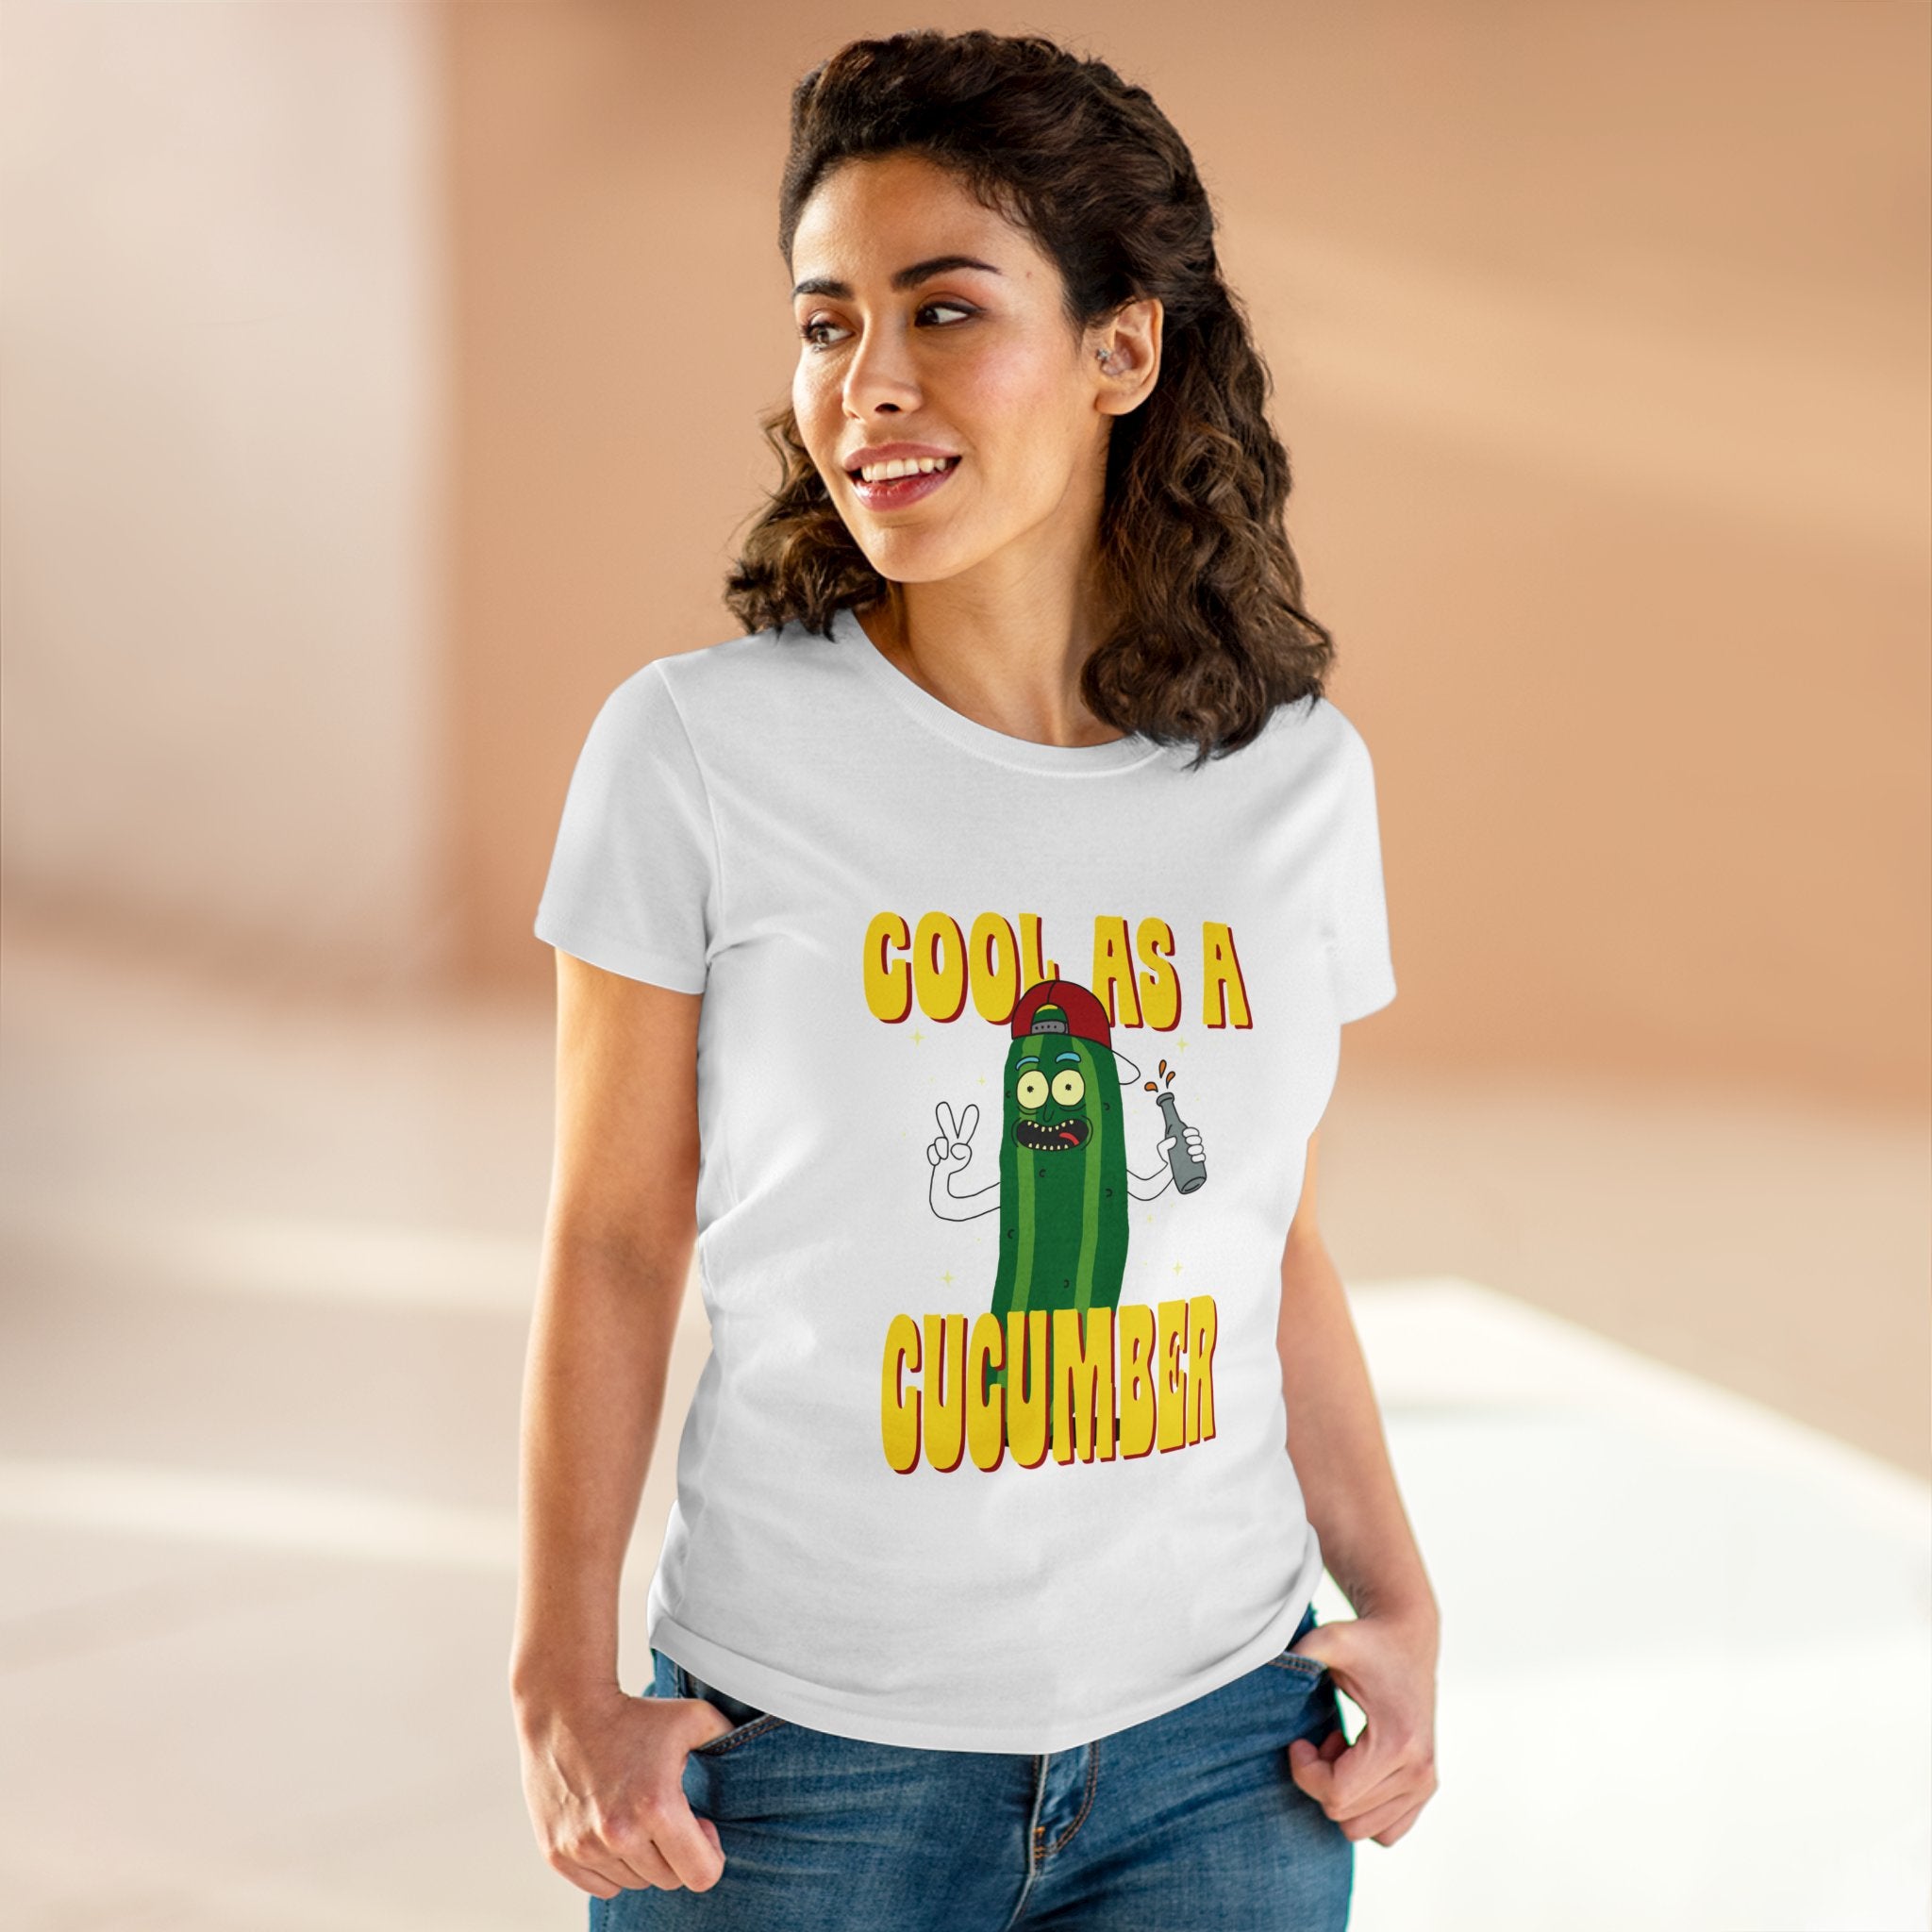 Woman standing and smiling, wearing a Cool as Cucumber - Women's Tee with a cartoon cucumber and the text "Cool as a Cucumber." The semi-fitted silhouette is crafted from pre-shrunk cotton for lasting shape and comfort.